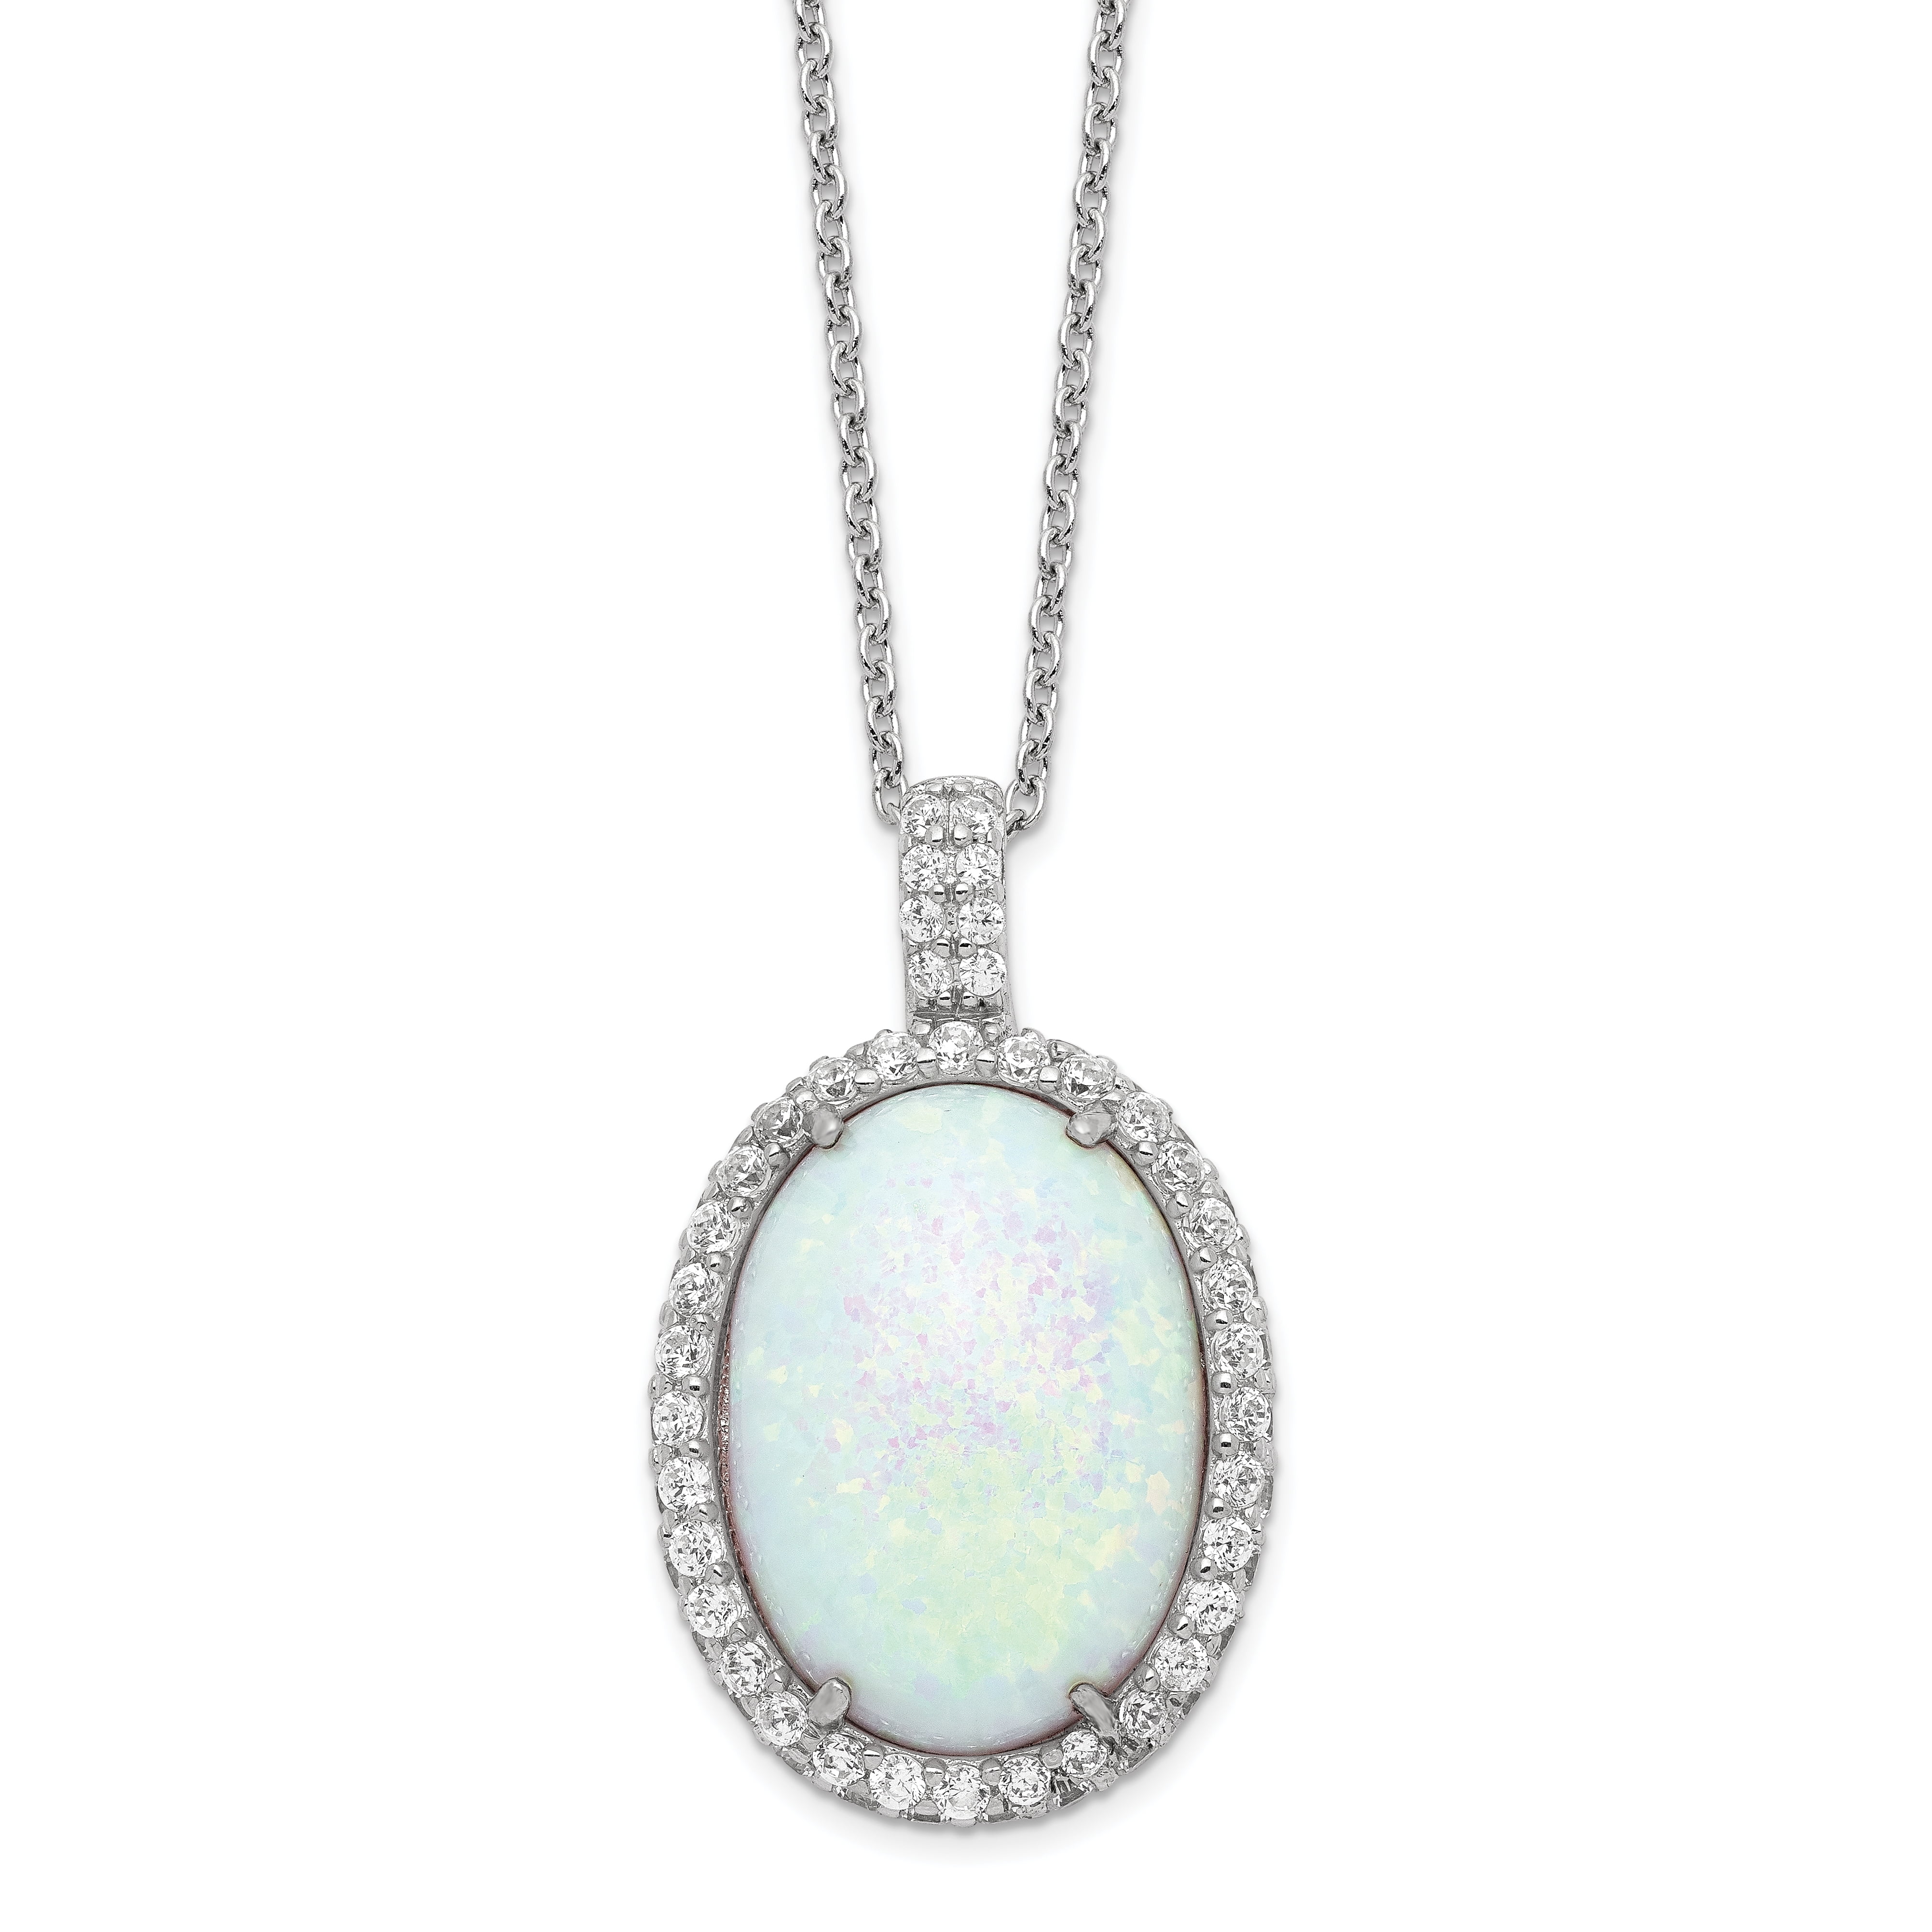 1CT Solitaire Oval White Rainbow Created Opal Pendant Necklace For Women For Teen 925 Sterling Silver October Birthstone